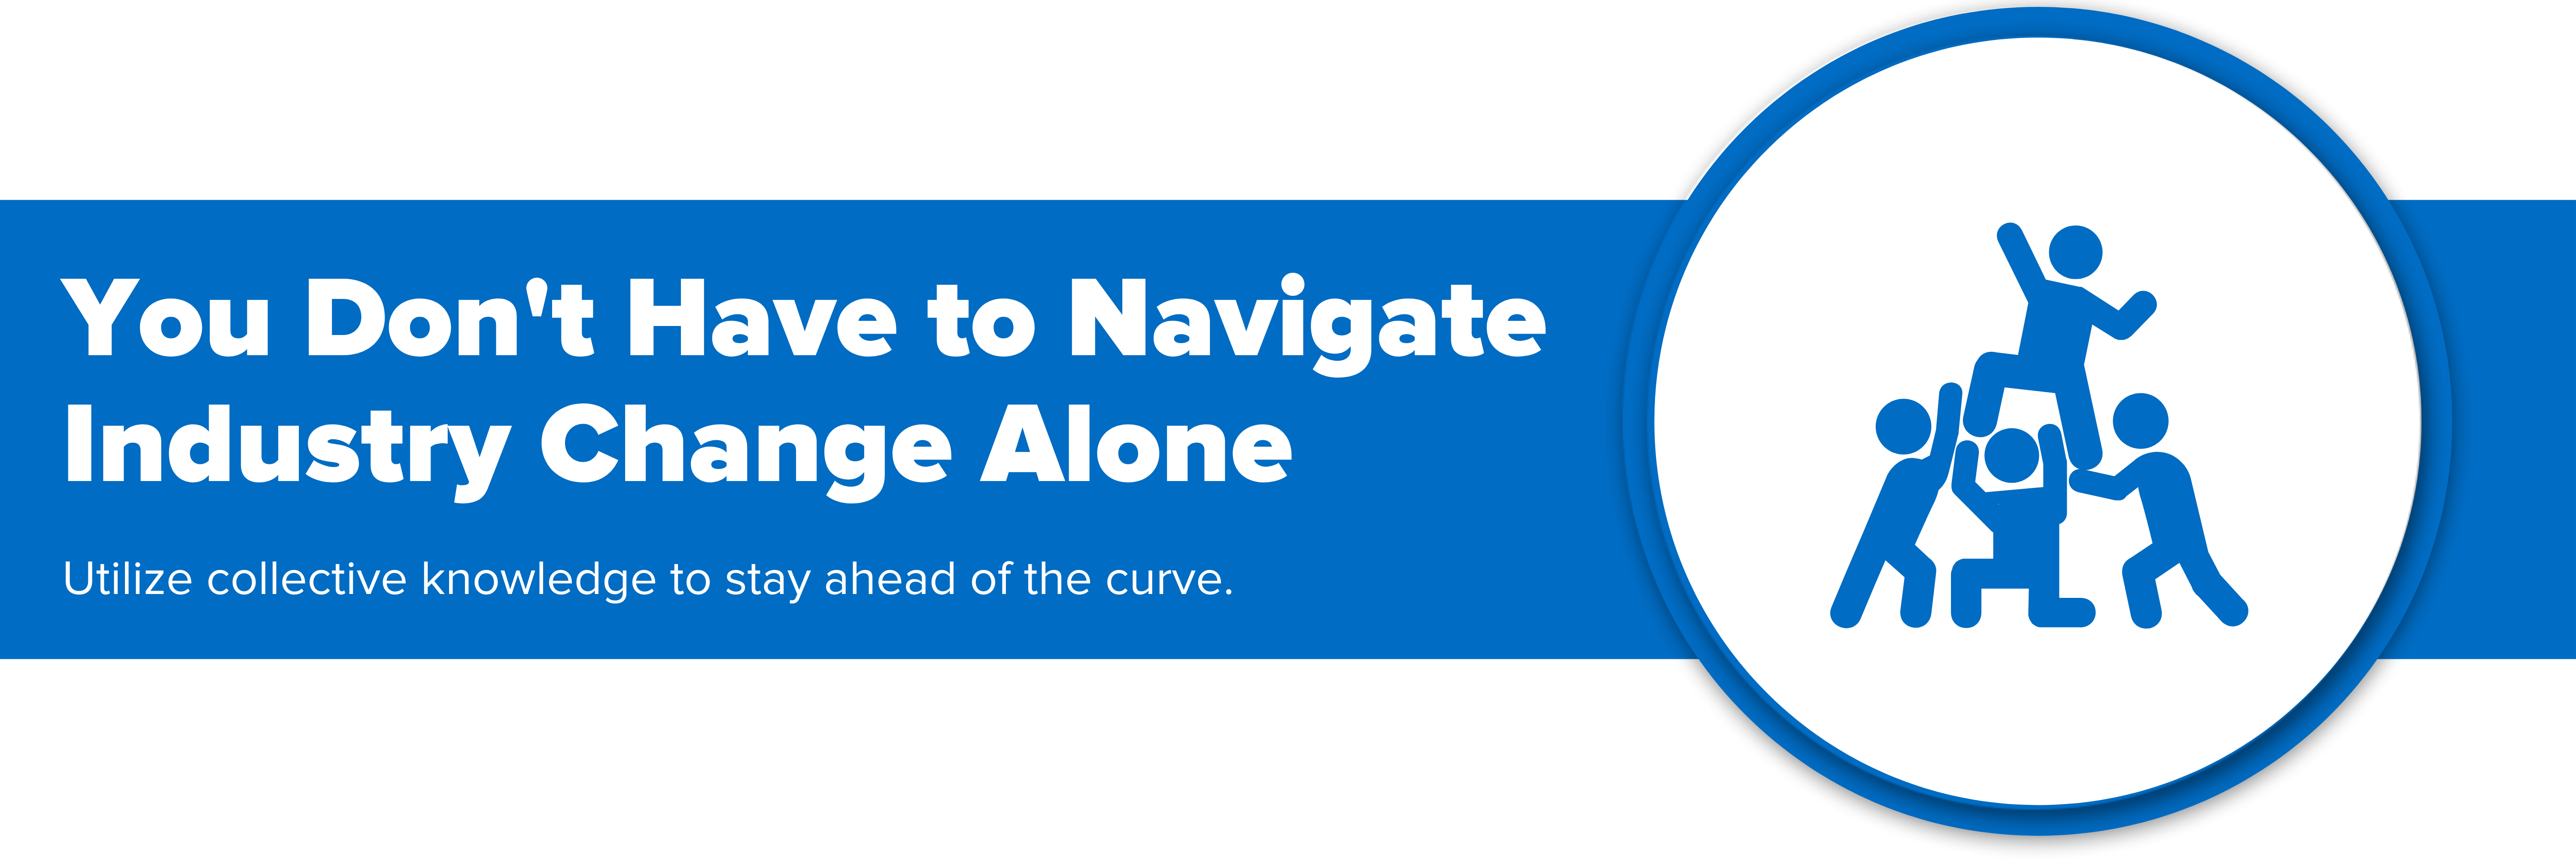 Header image with text "You Don't Have to Navigate Industry Change Alone"